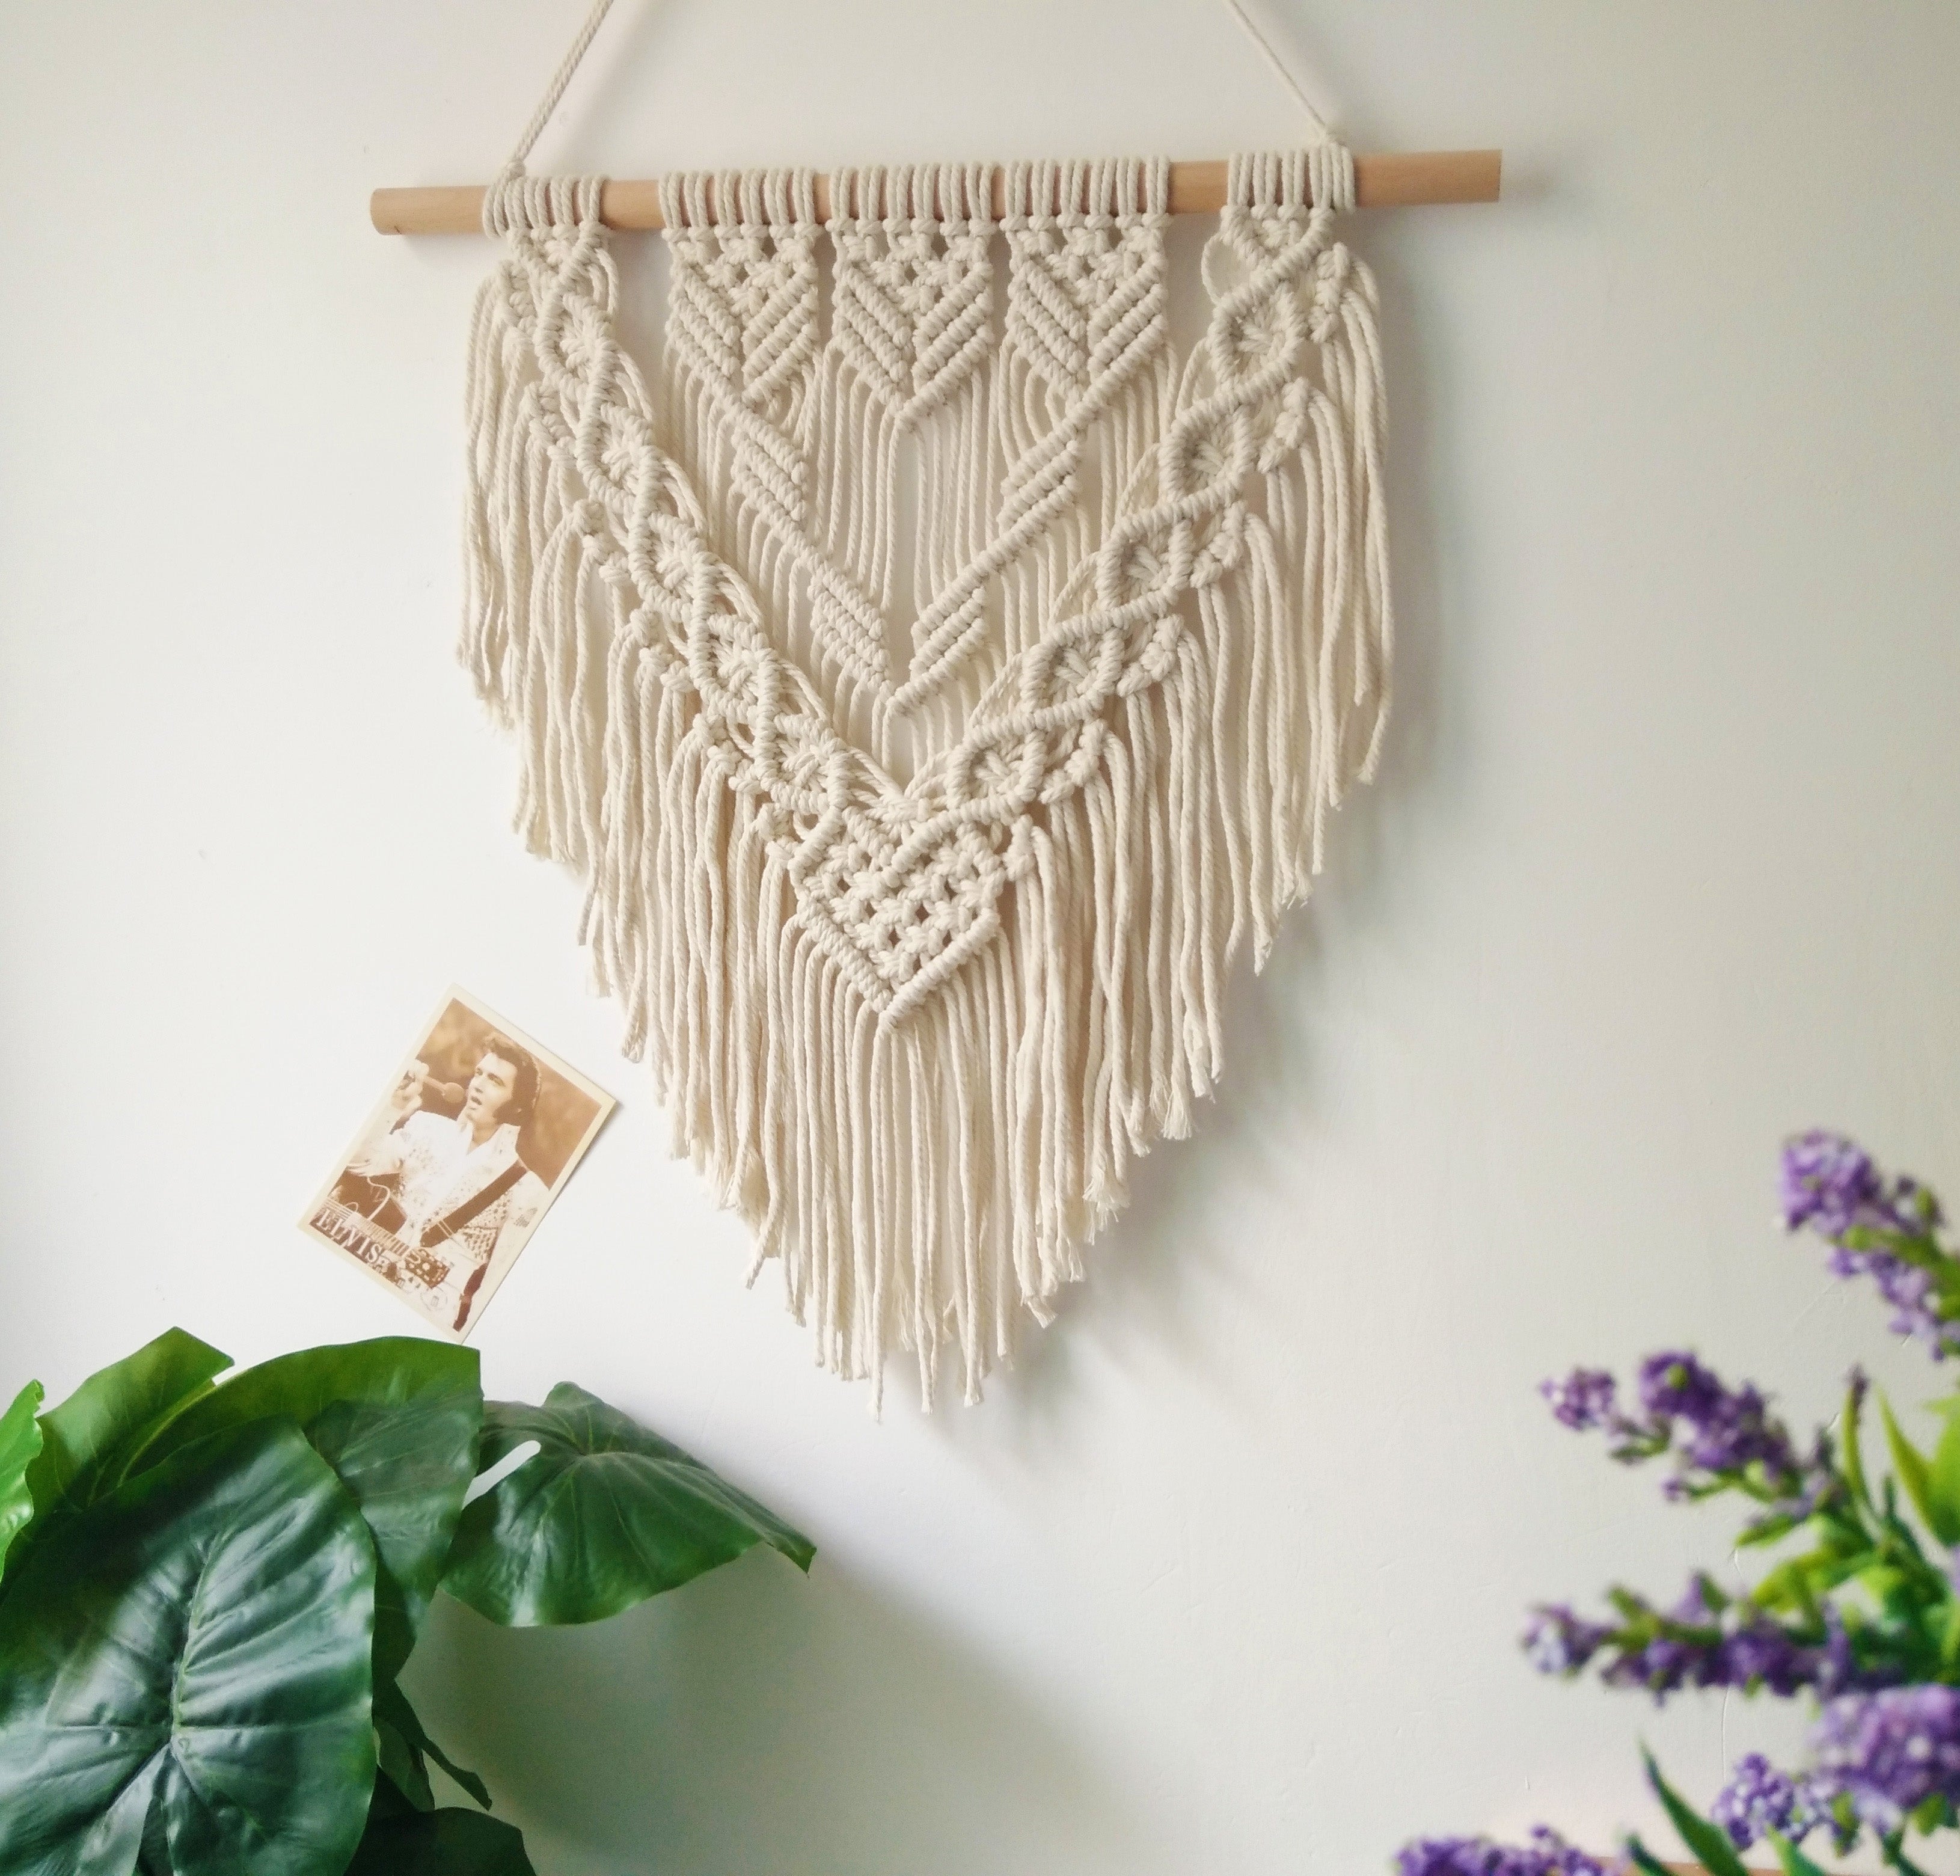 Macrame wall hanging, Macrame Tapestry, Indoor Hanging, Wall Decor, Wall Pediment, Living Room, Kitchen, Bedroom or Apartment